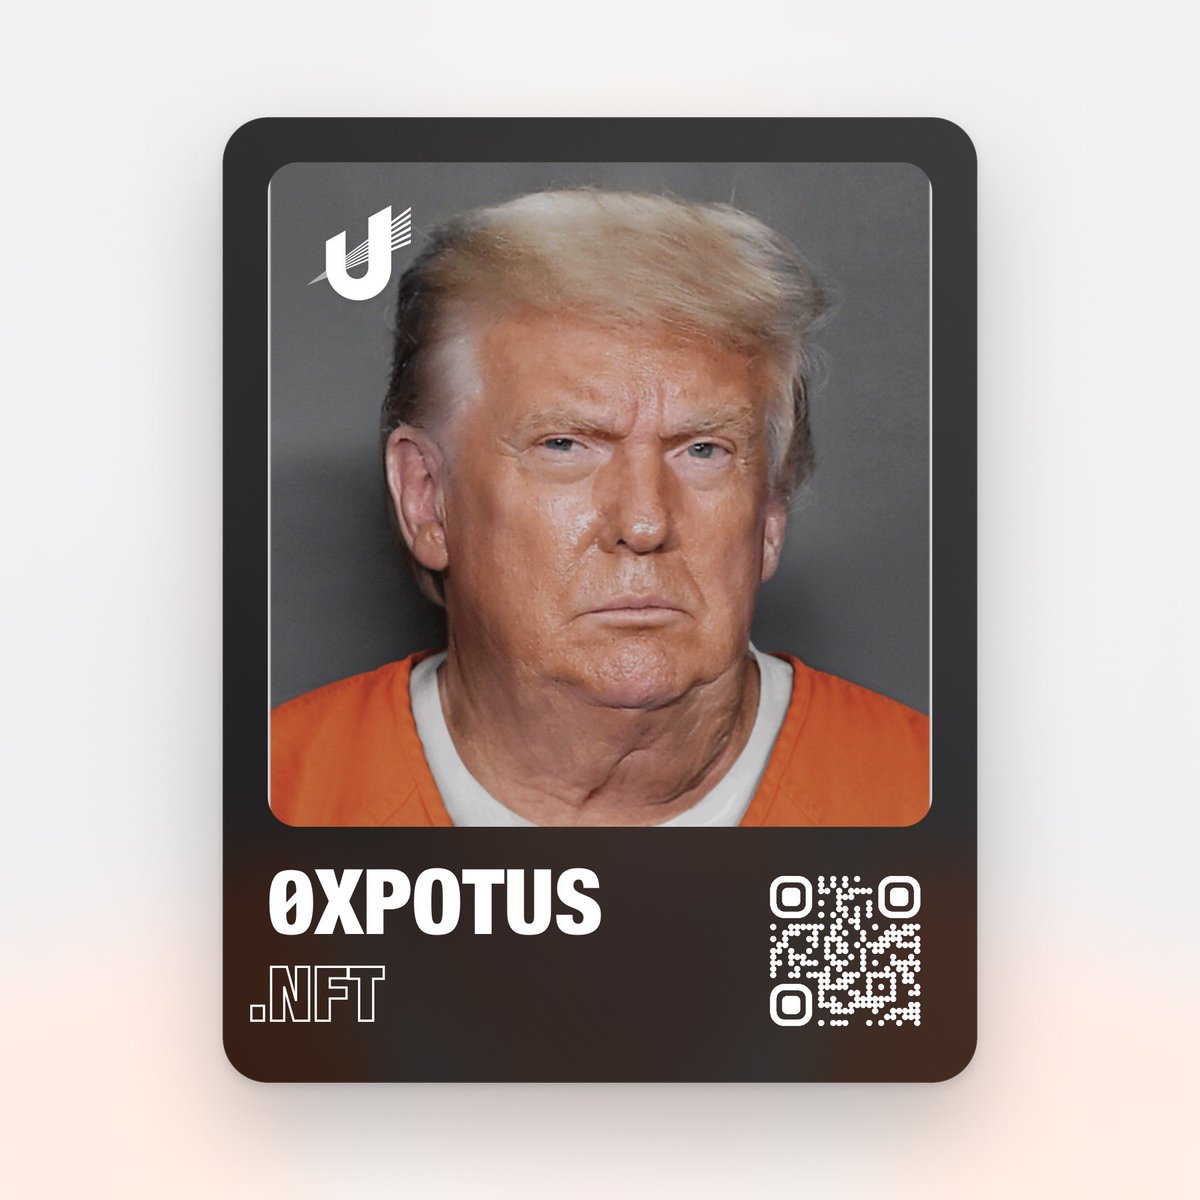 … new trump card this tuesday send $20 crypto for whitelist access before public mint … #Polygon #CapitalRiot #MAGA